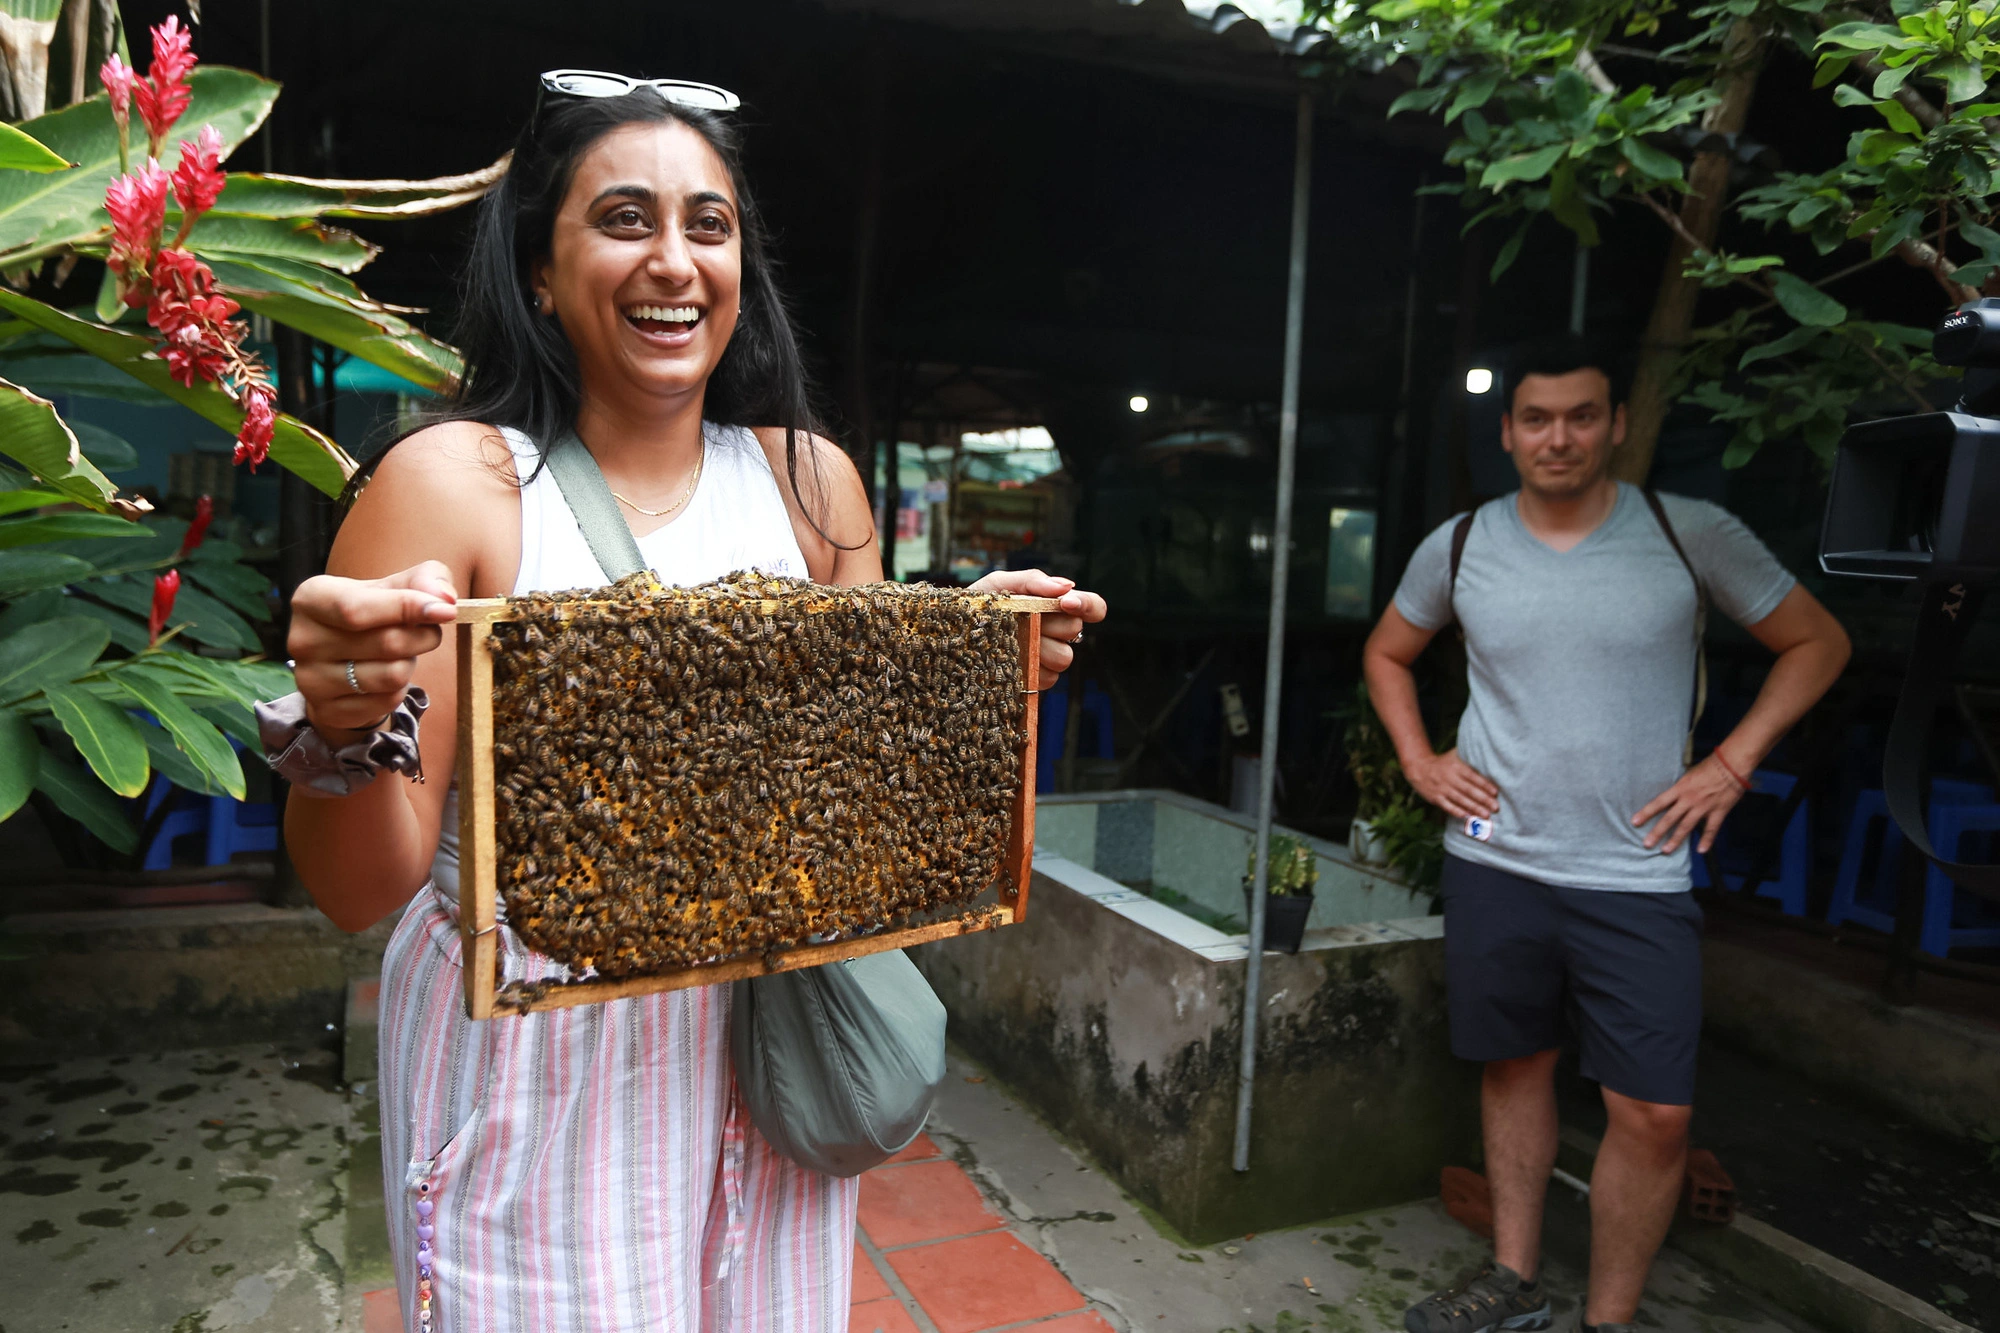 A foreign tourist excitedly holds a hive frame produced through a unique beekeeping model developed by residents on Thoi Son Isle, located on the Tien River in Tien Giang Province, southern Vietnam. Photo: Phuong Quyen / Tuoi Tre